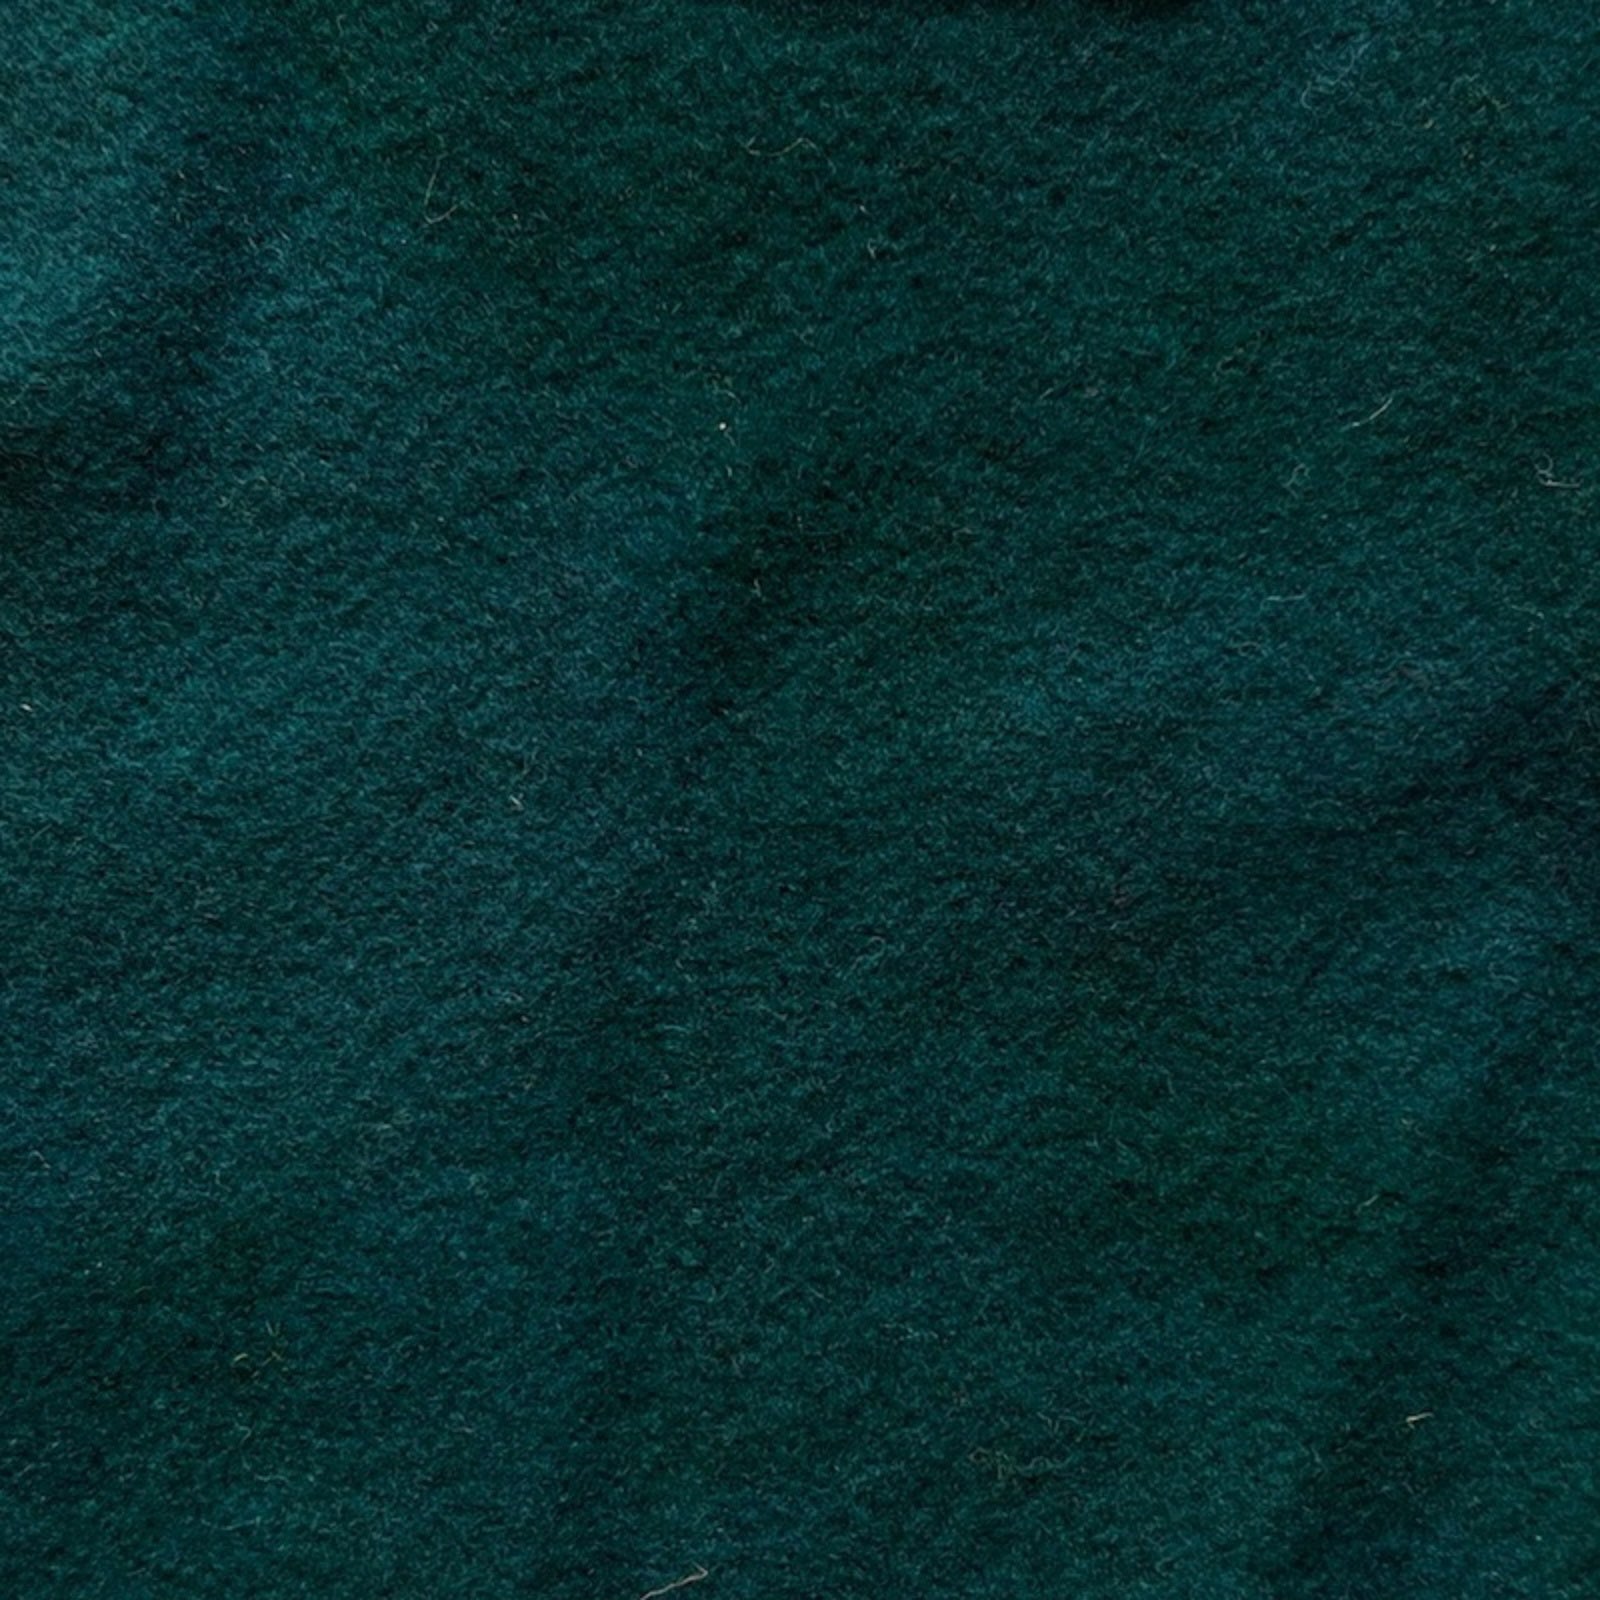 Hot Teal - Colorama Hand Dyed Wool - Offered by HoneyBee Hive Rug Hooking